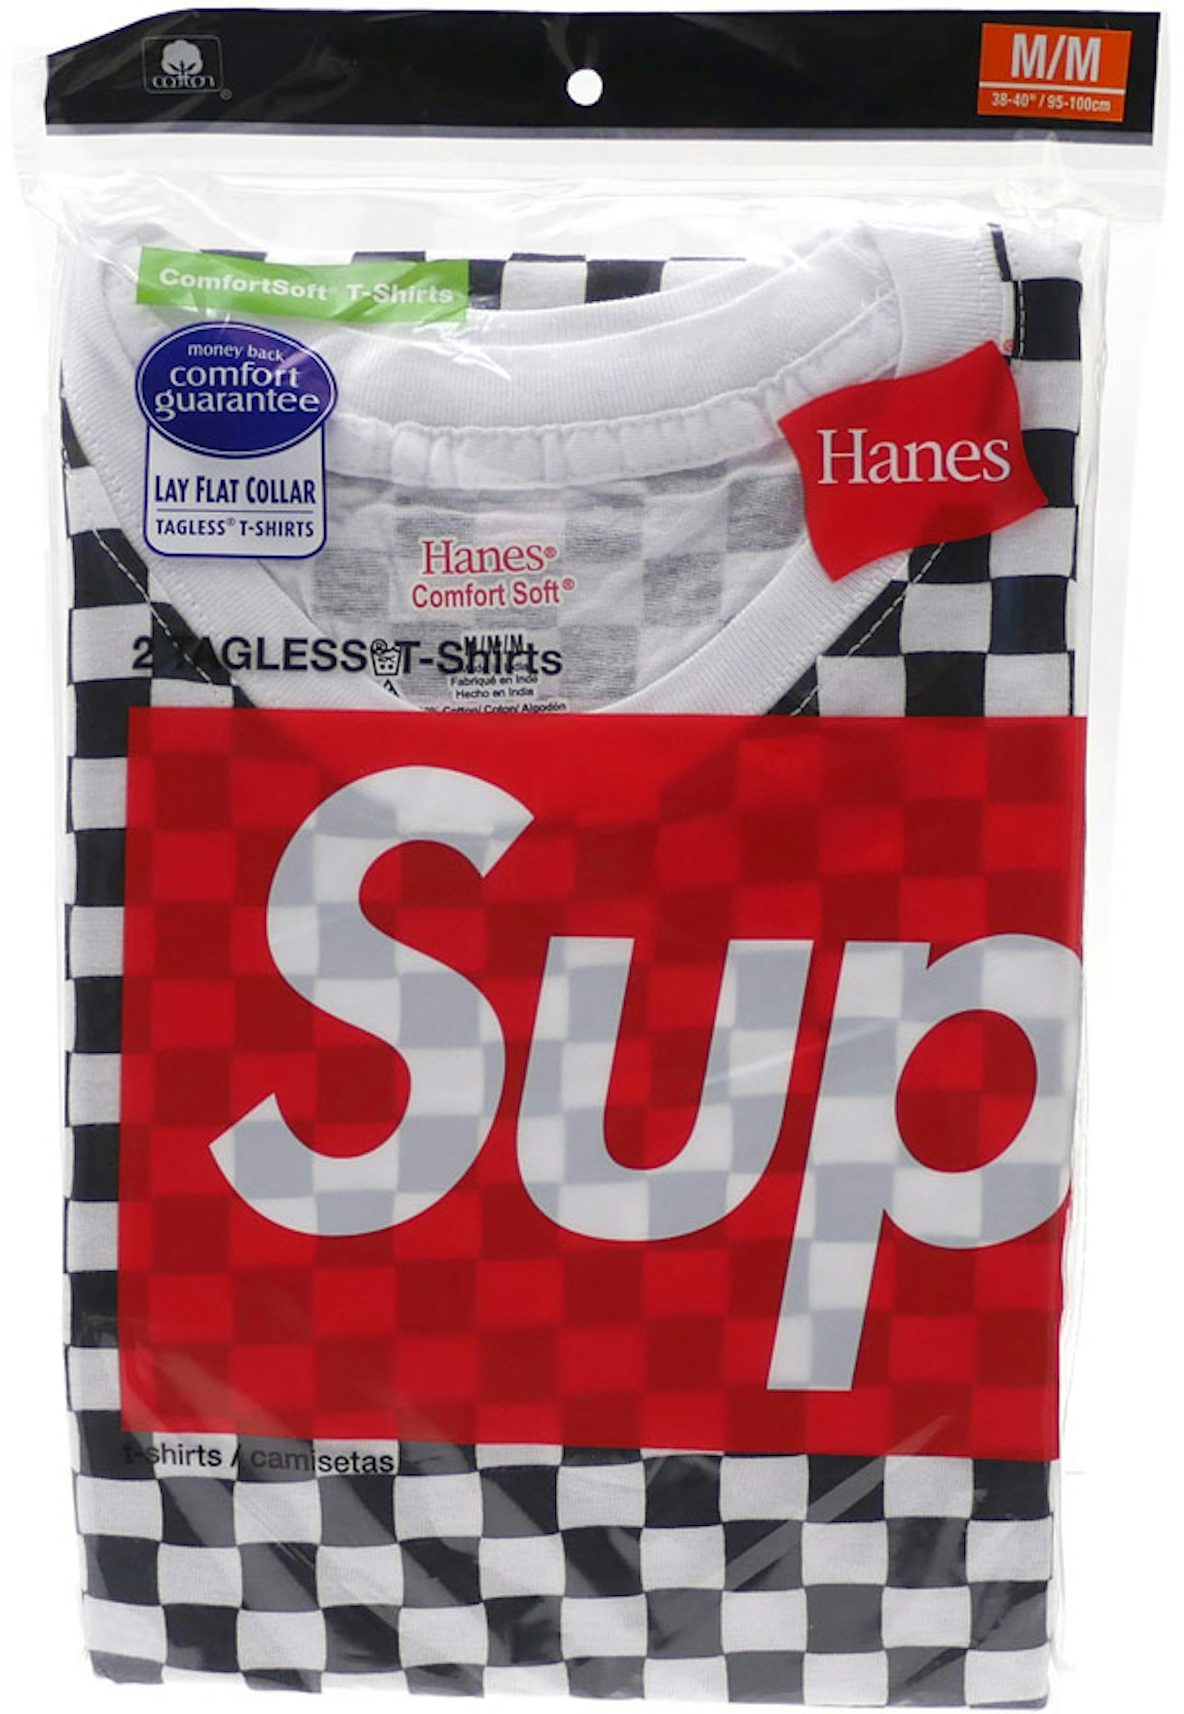 Supreme Hanes Purple Tagless Tees (2 pack) Size Large SS21